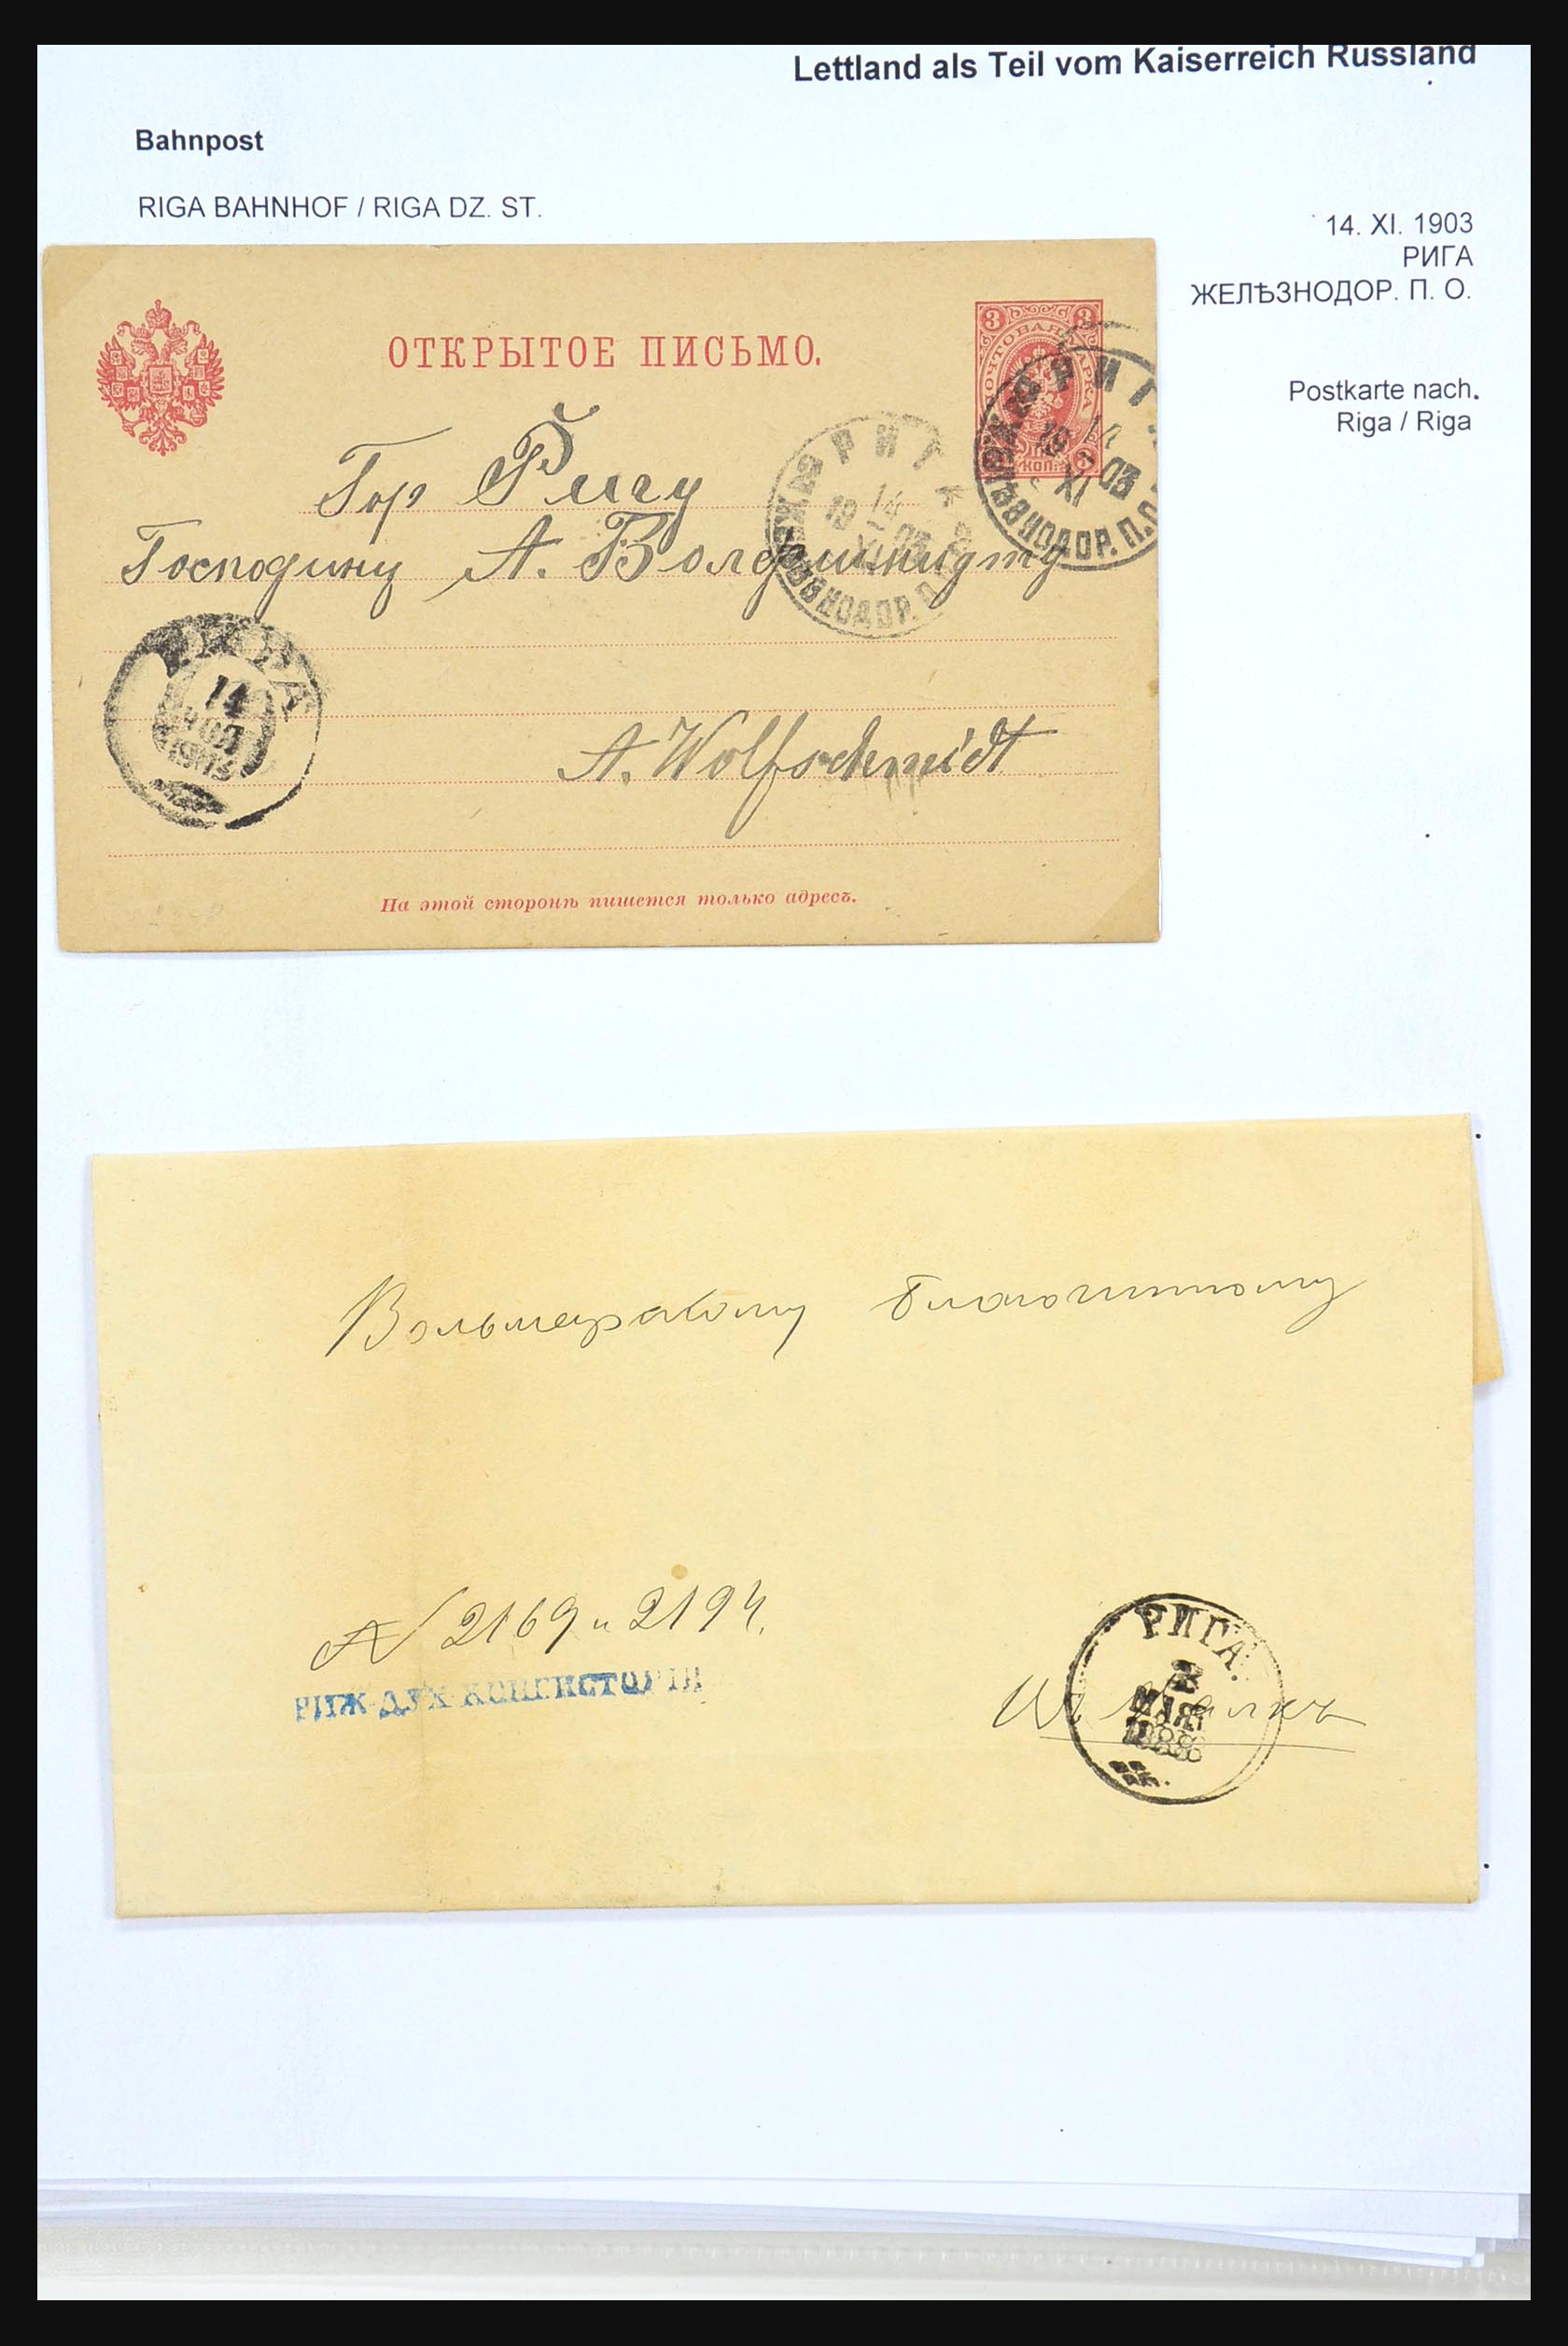 31305 068 - 31305 Latvia as part of Russia 1817-1918.